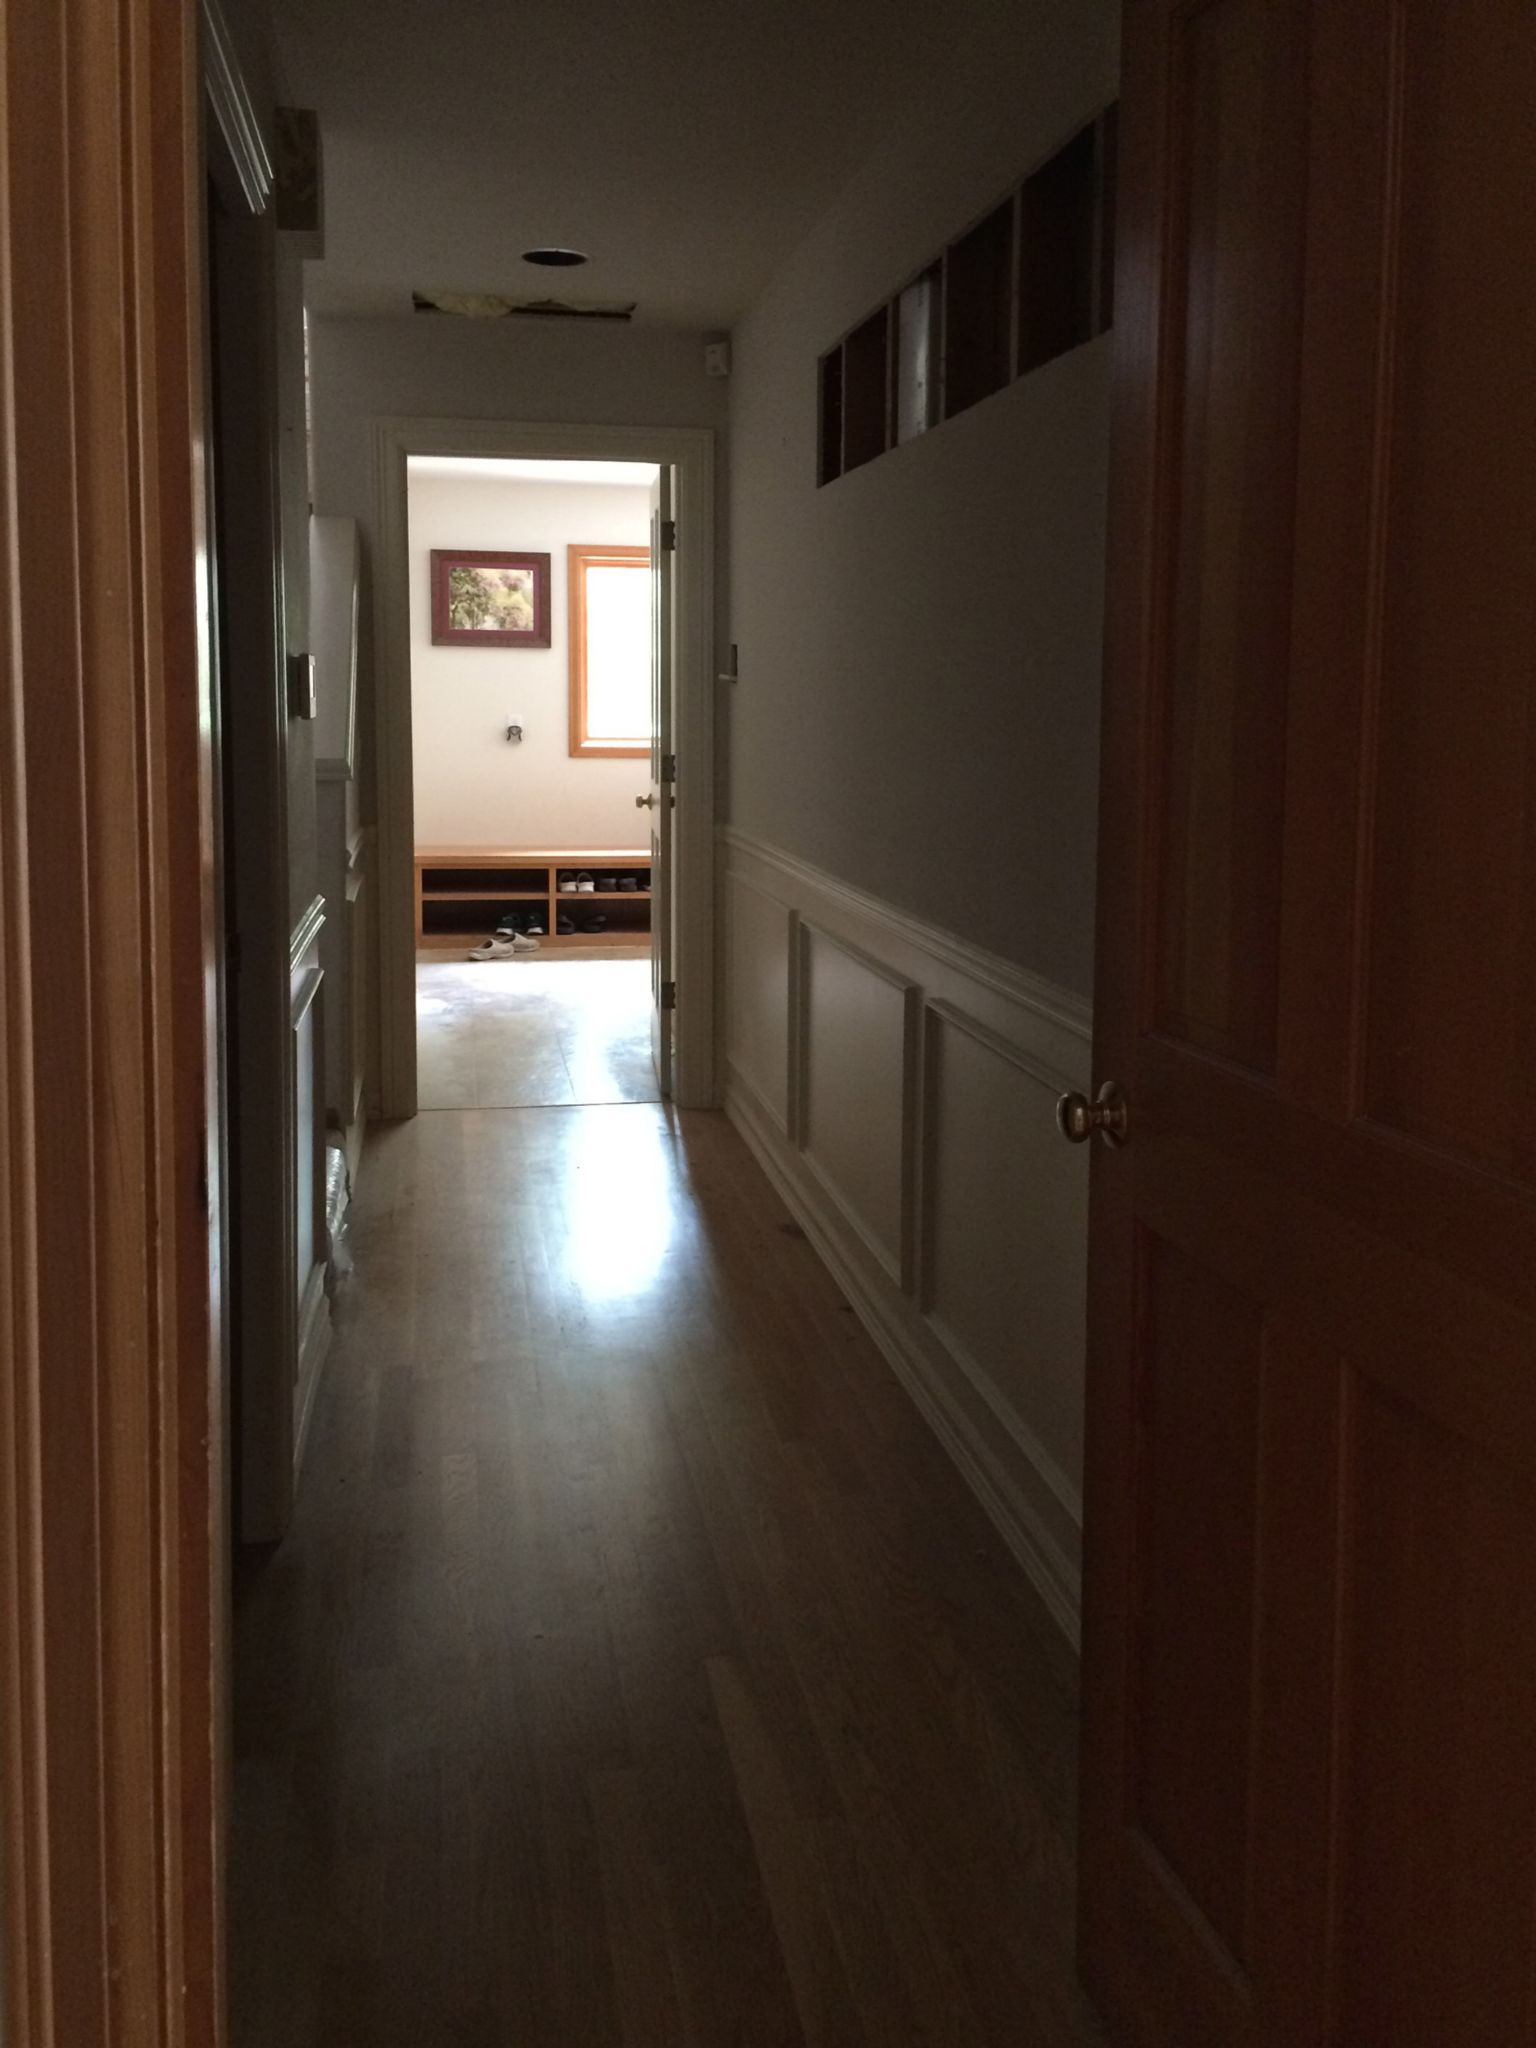 Ran from kitchen to mud room; door the kitchen end hid the hall lightswitch, and why was a door even there?